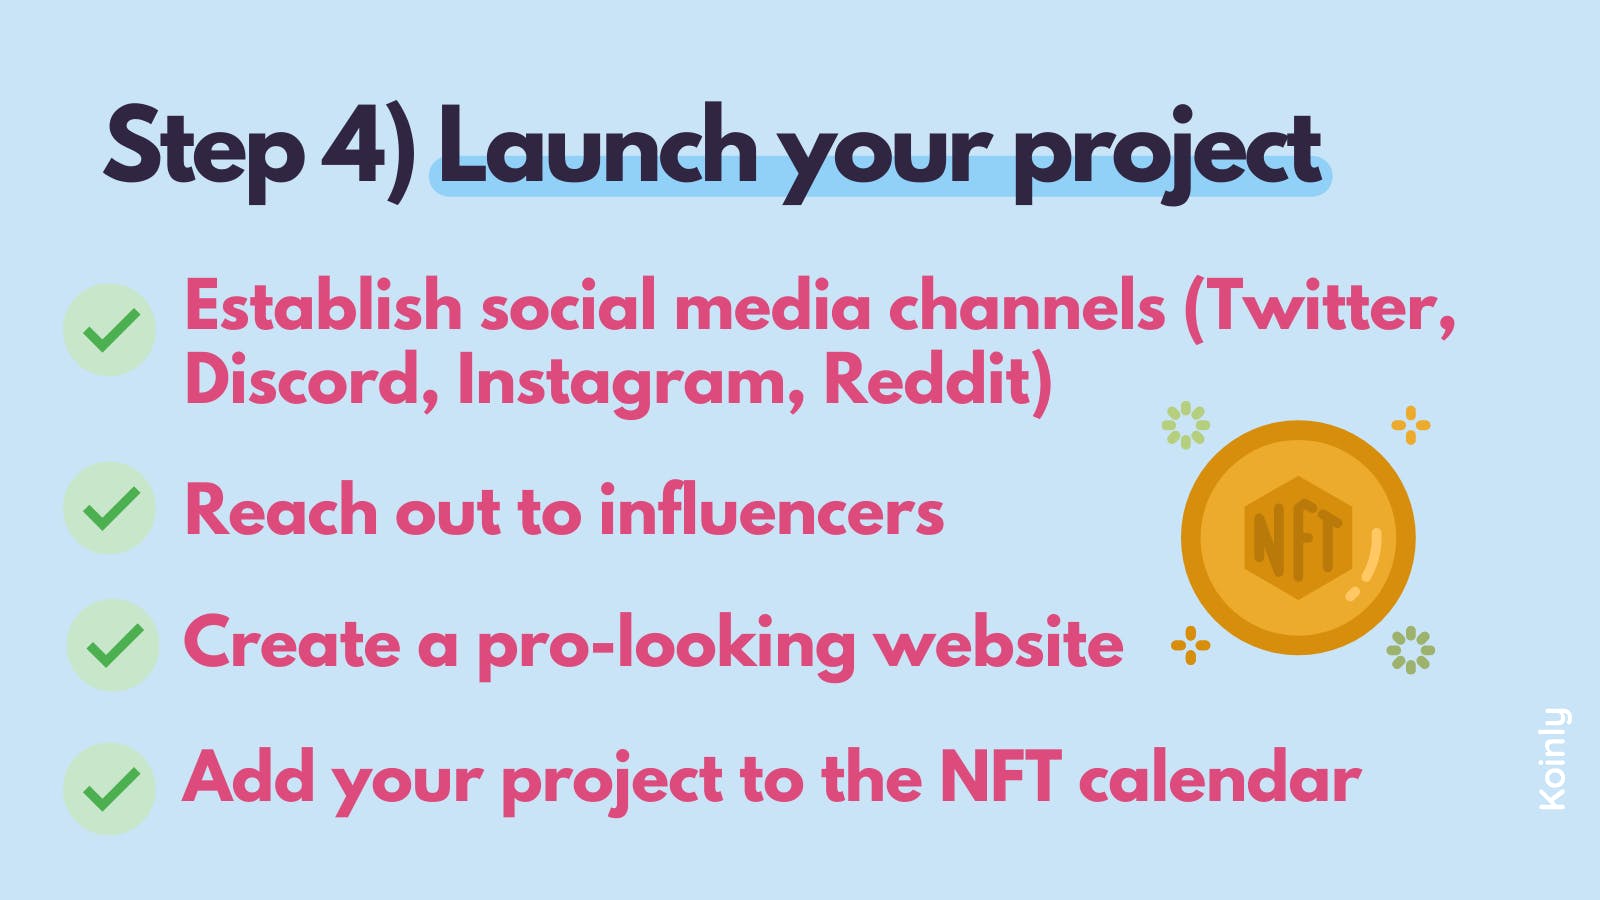 Launch your project